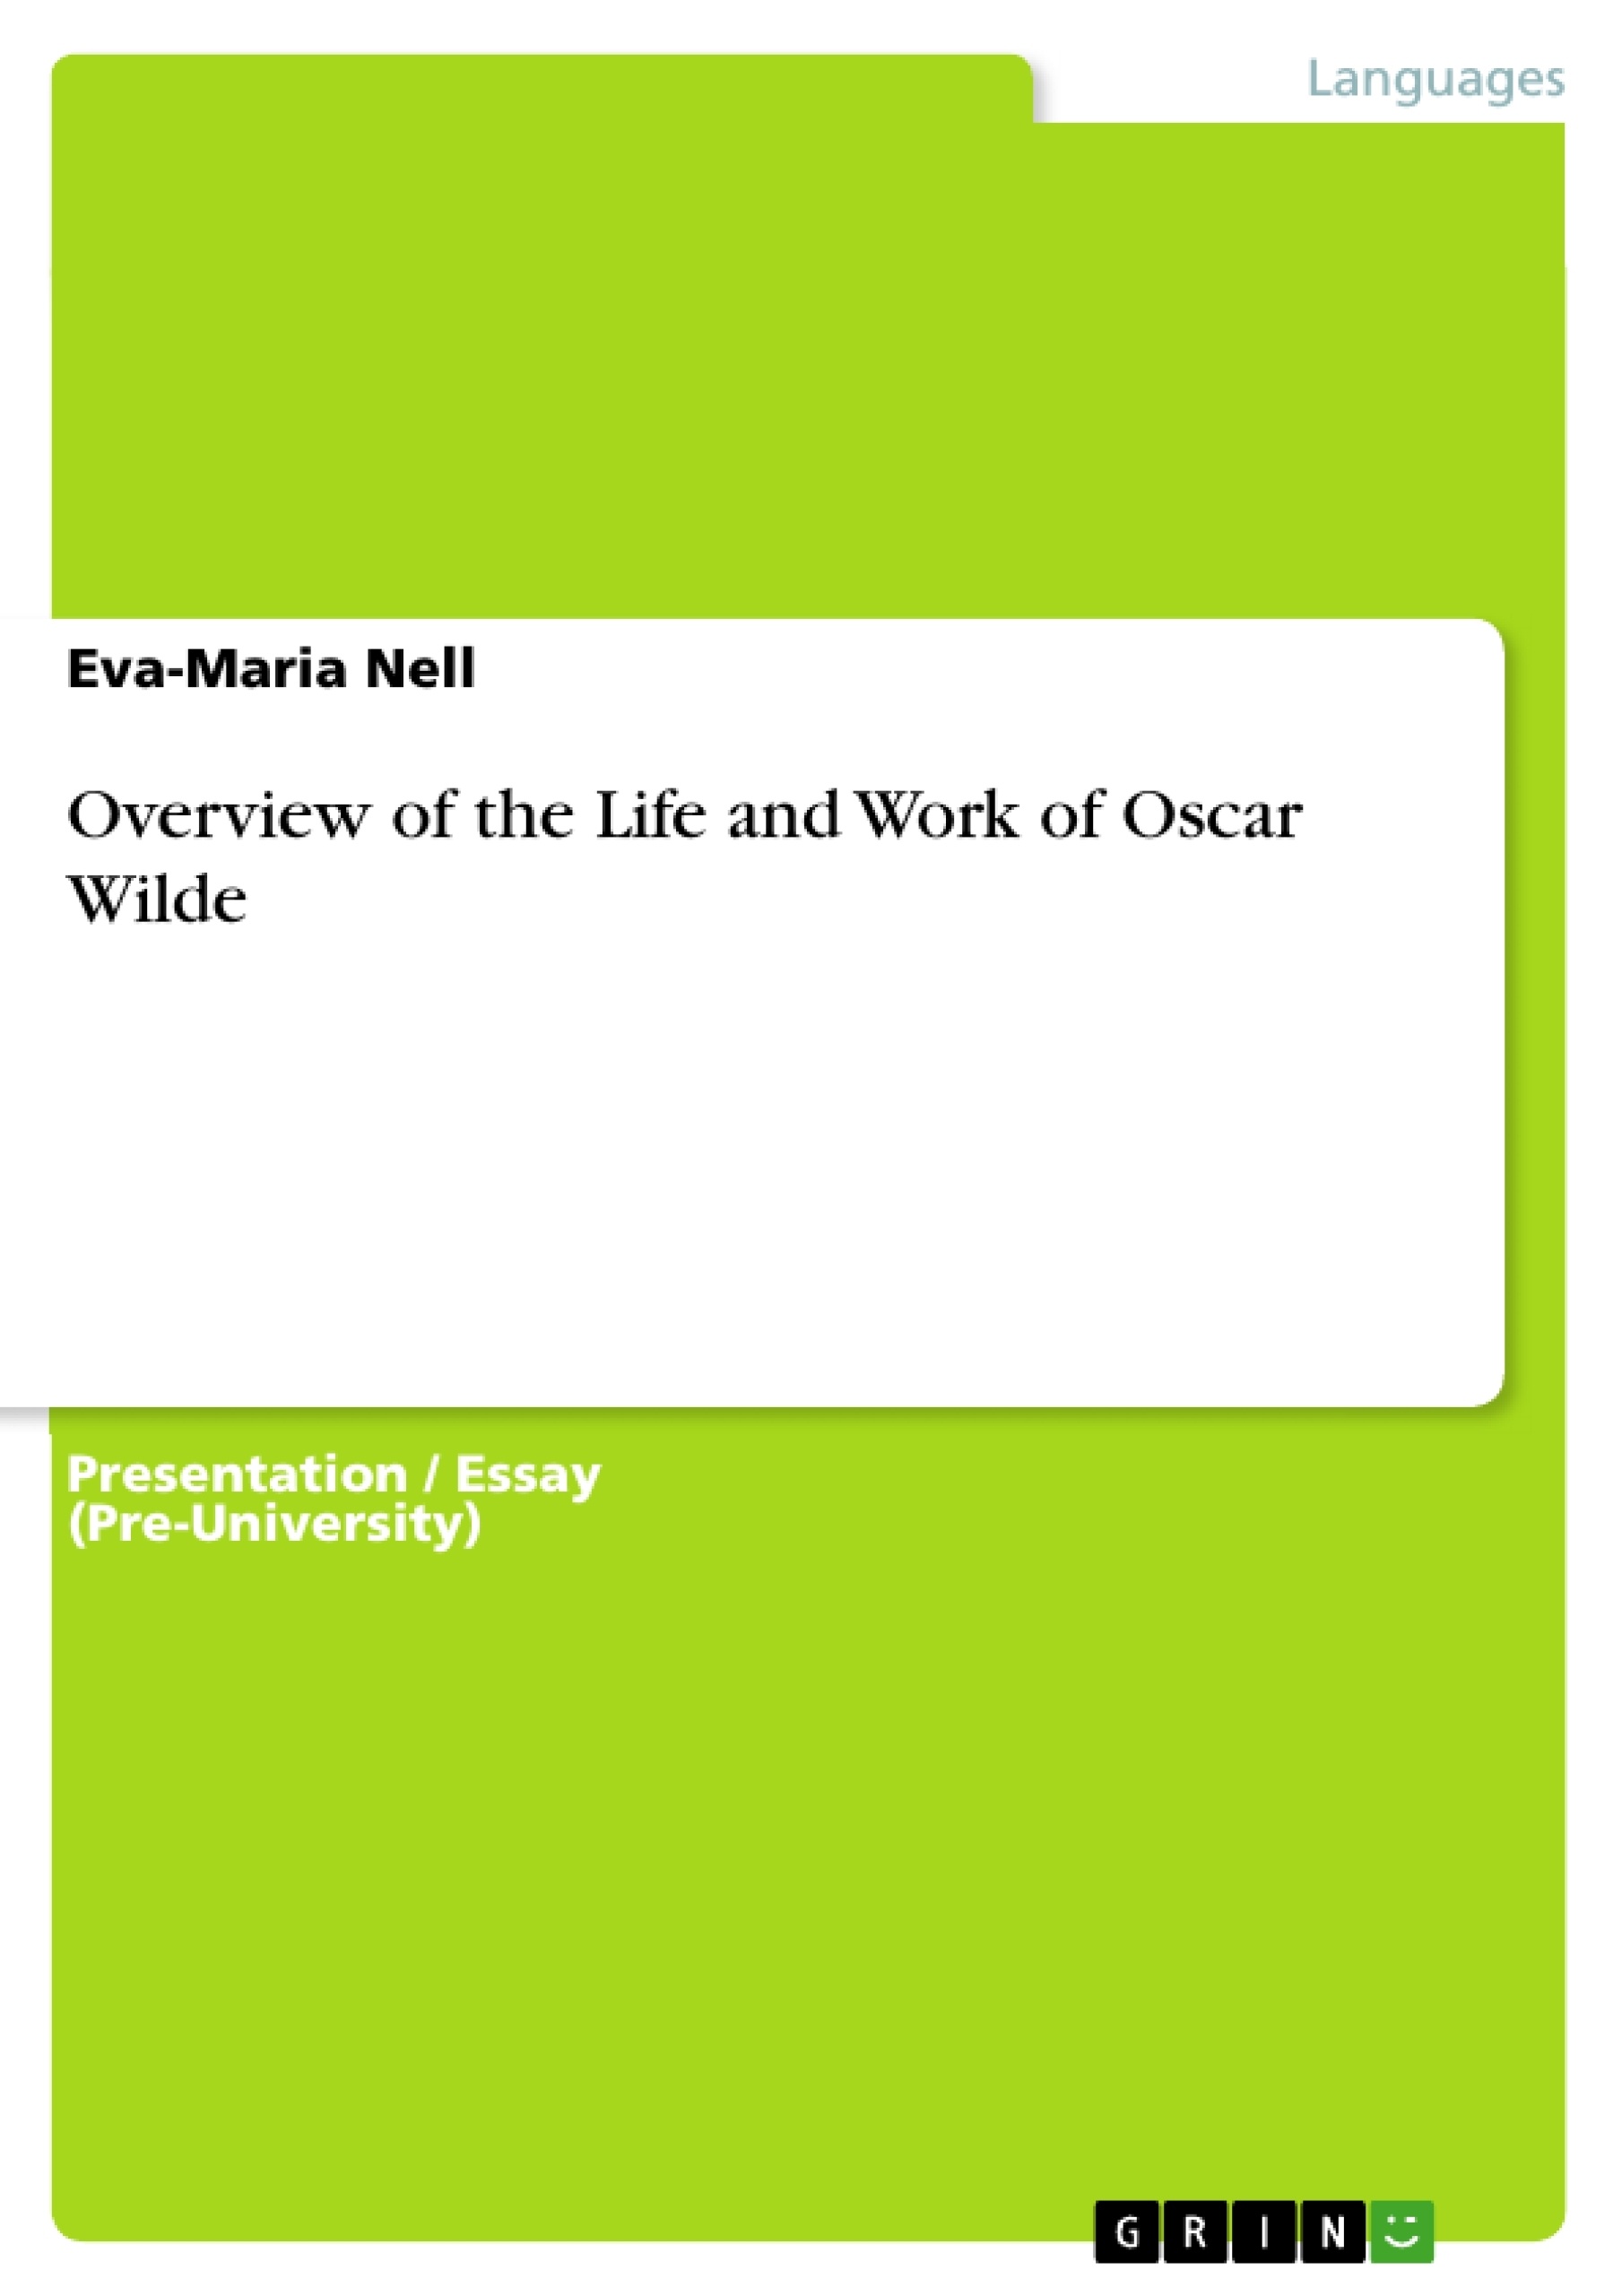 Title: Overview of the Life and Work of Oscar Wilde